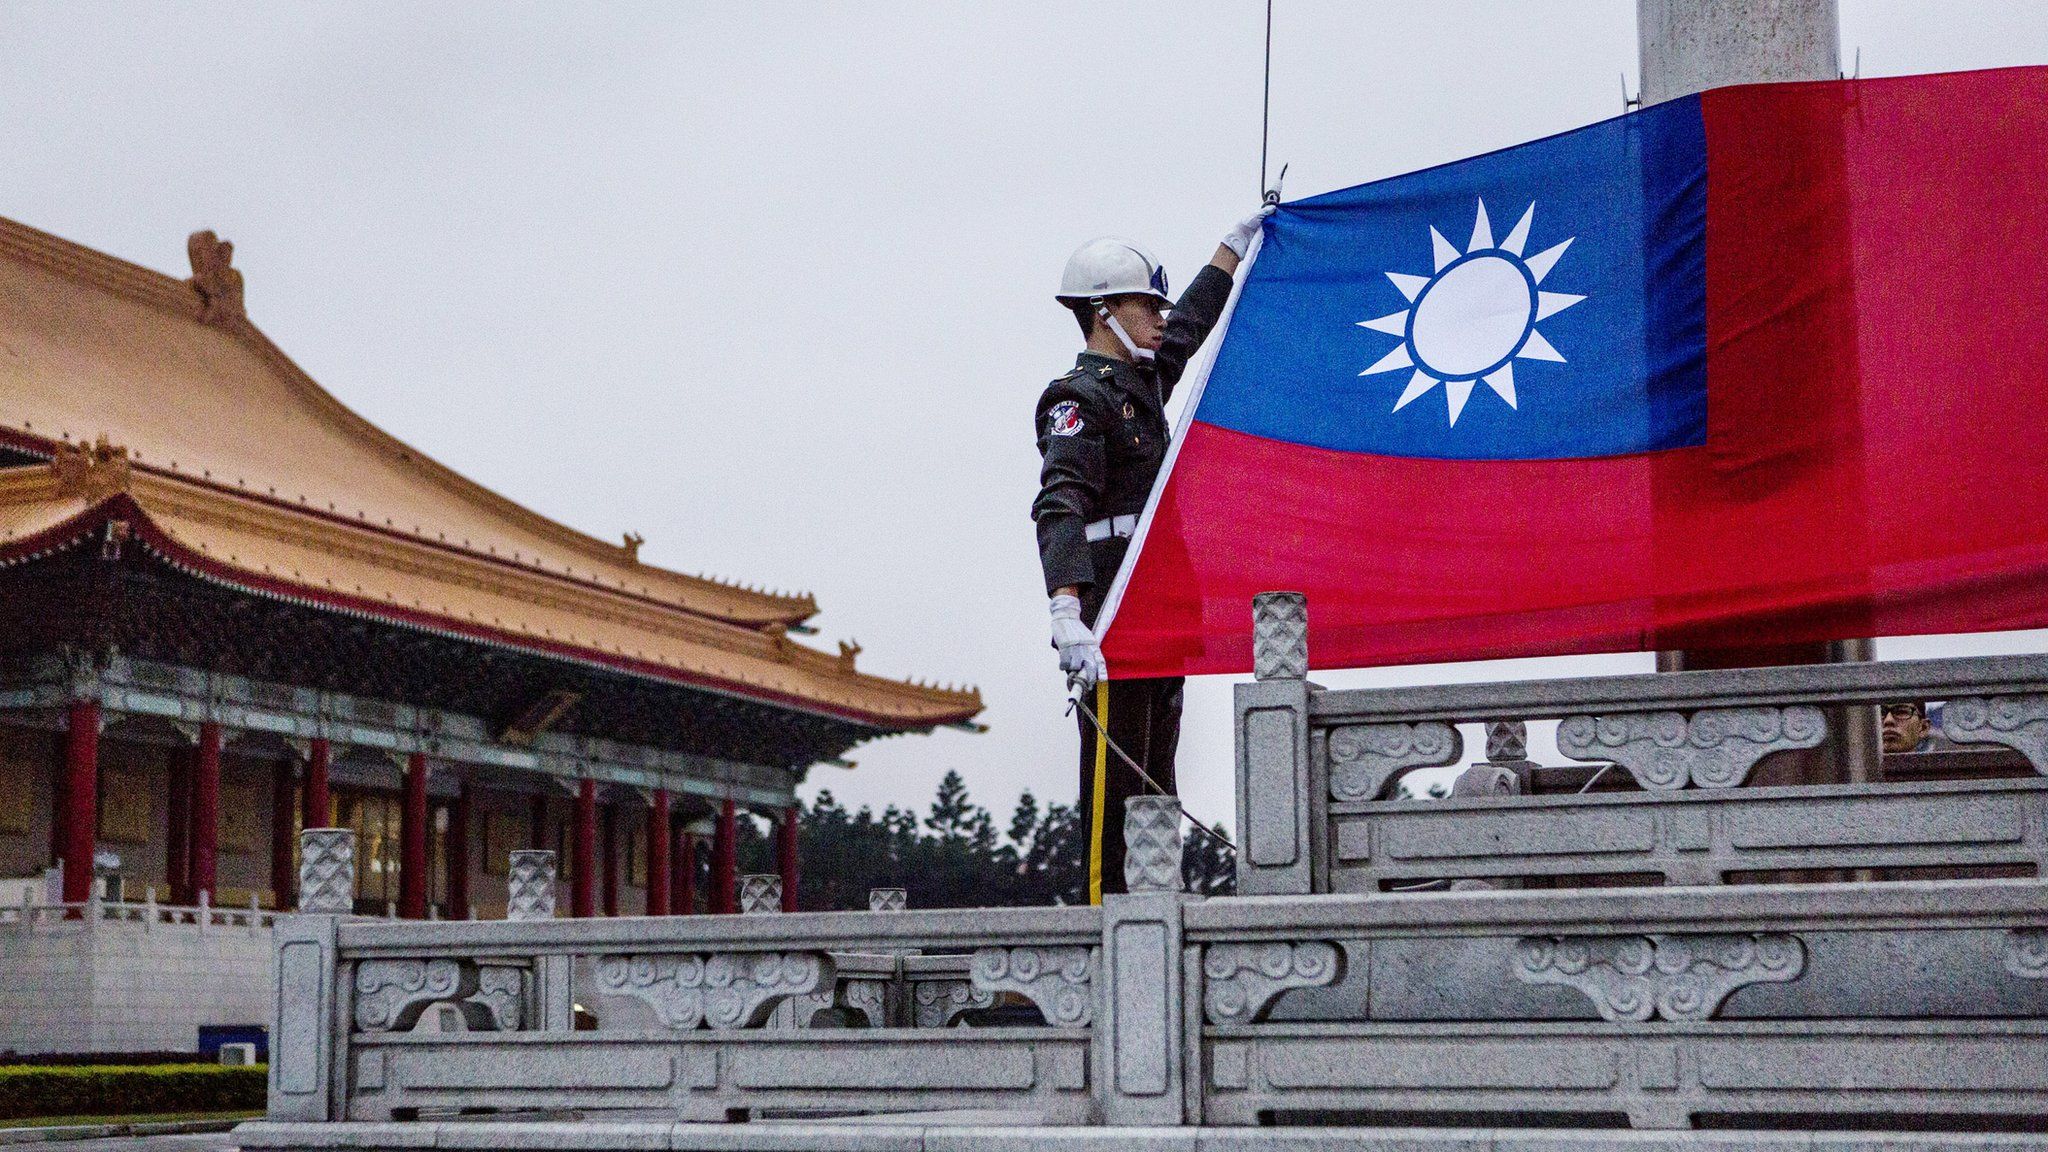 Guards prepare to raise the Taiwan flag in the Chiang Kai-shek Memorial Hall square ahead of the Taiwanese presidential election in Taipei, Taiwan, 14 January 2016